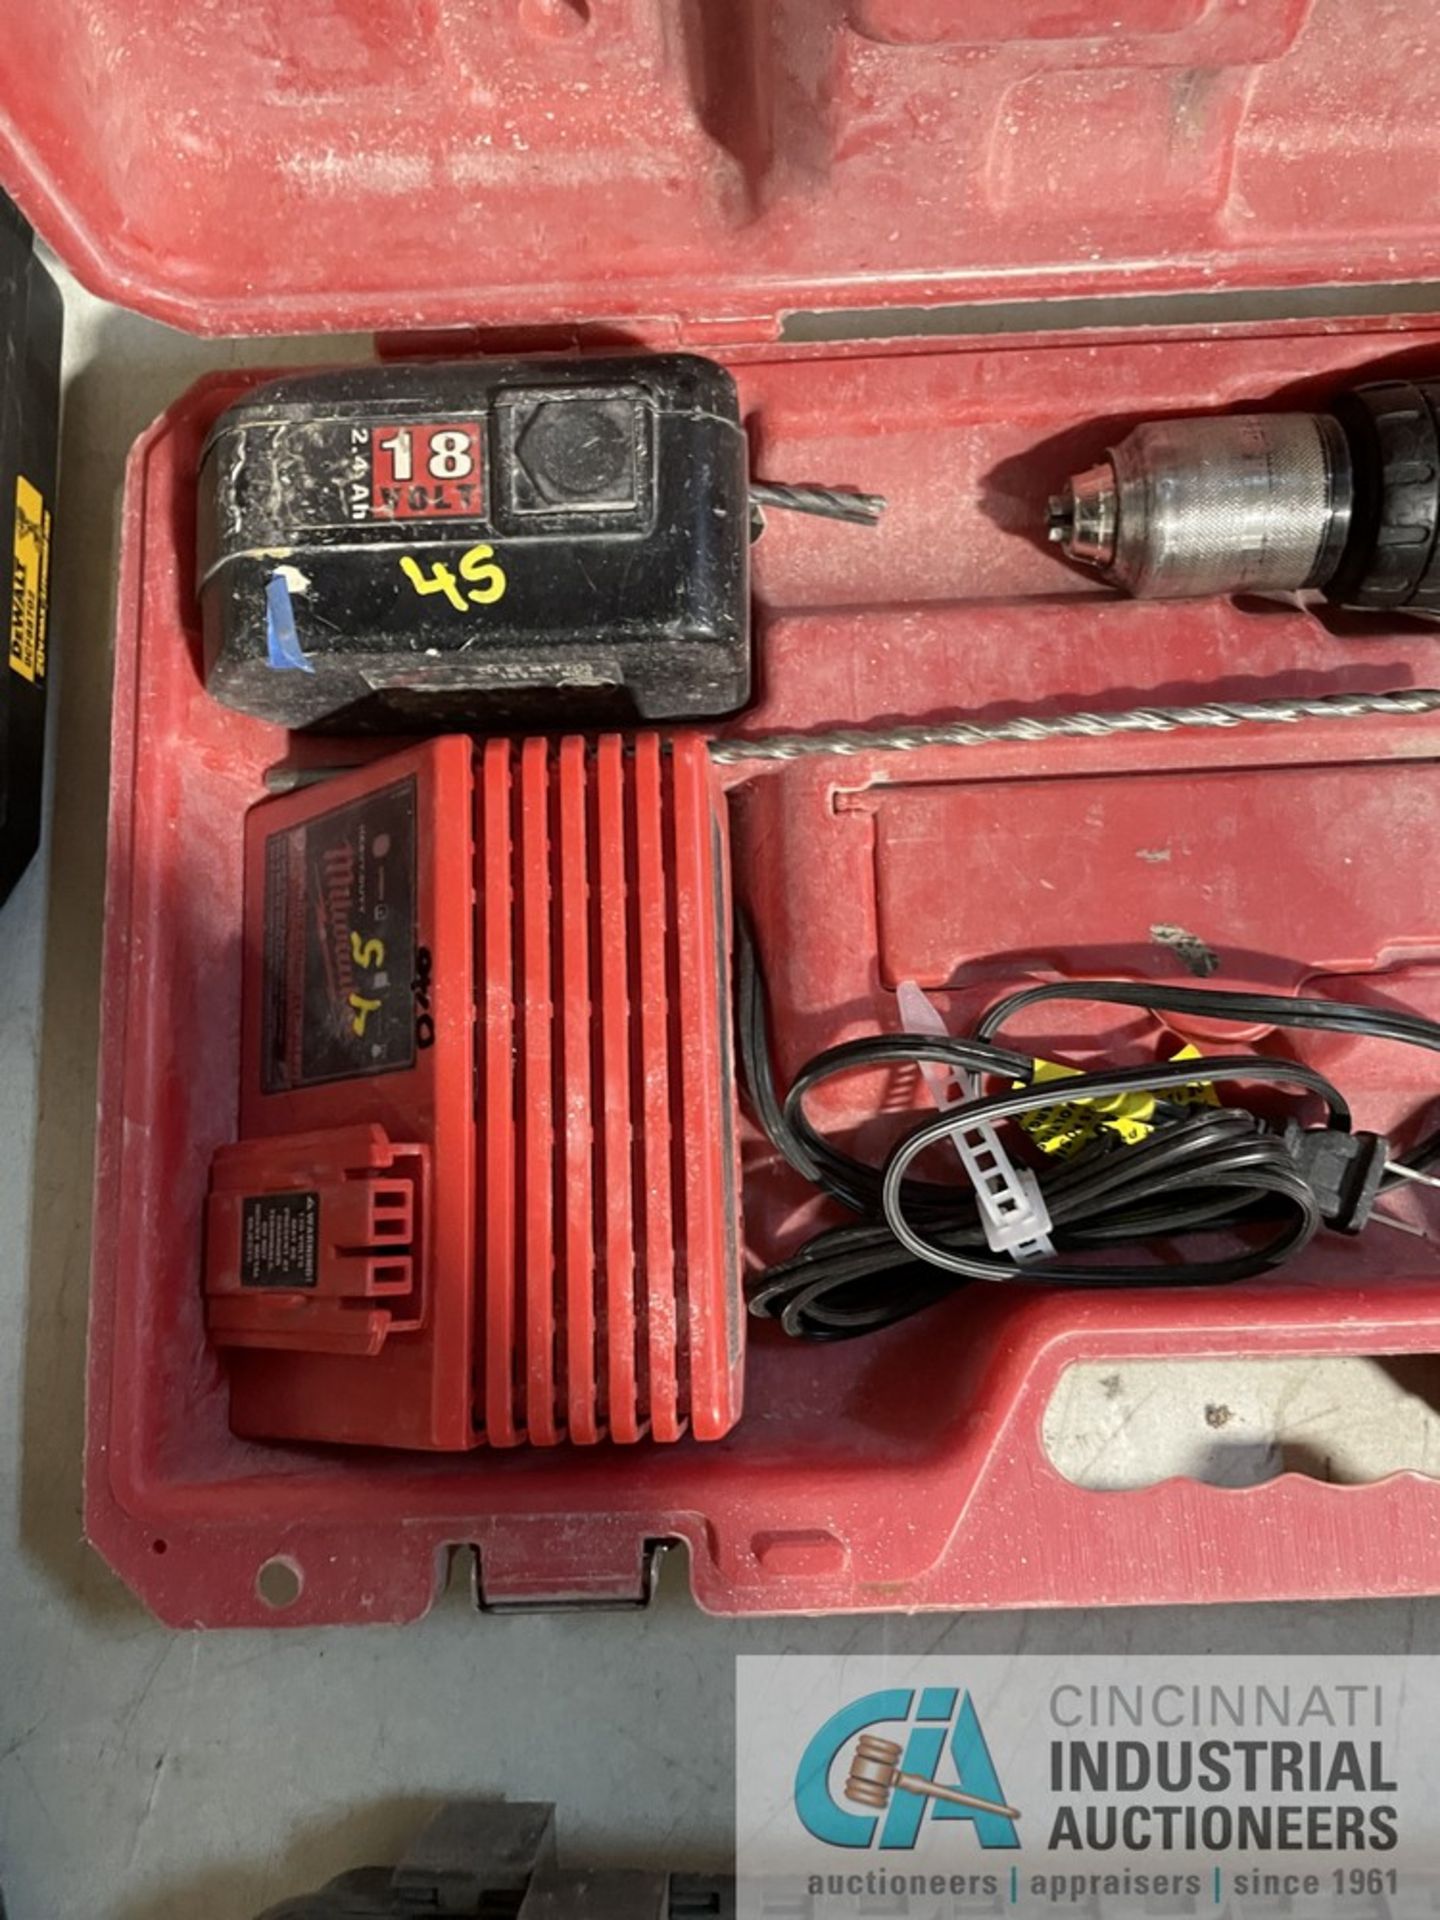 1/2" / 18 VOLT MILWAUKEE CORDLESS DRILL / DRIVER WITH CHARGER AND BATTERIES - Image 3 of 3